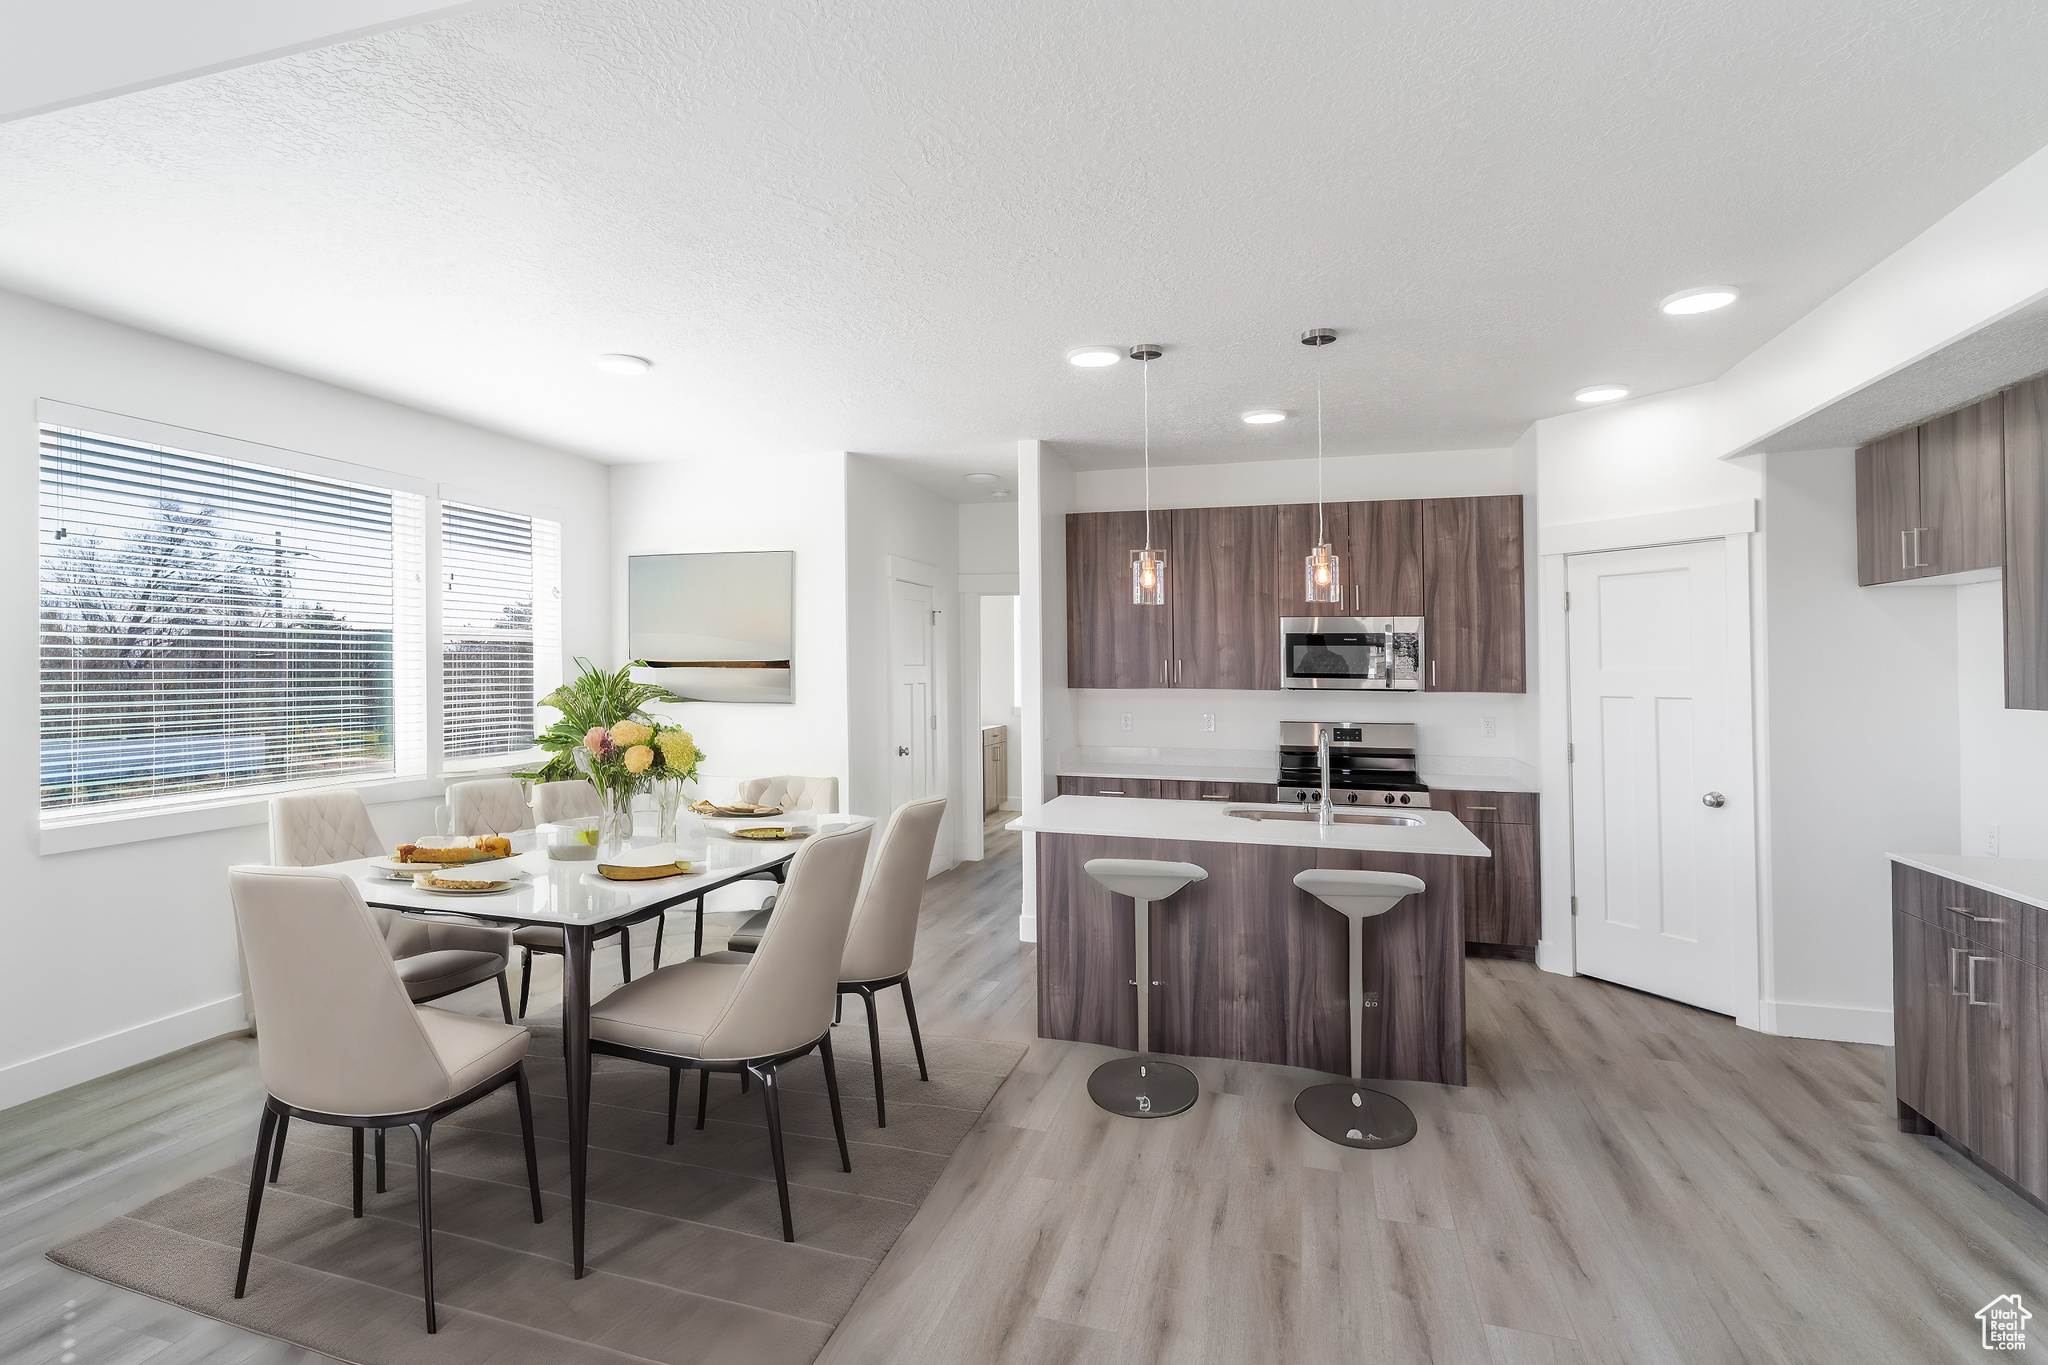 Kitchen with appliances with stainless steel finishes, dark brown cabinetry, a center island with sink, hanging light fixtures, and light hardwood / wood-style floors